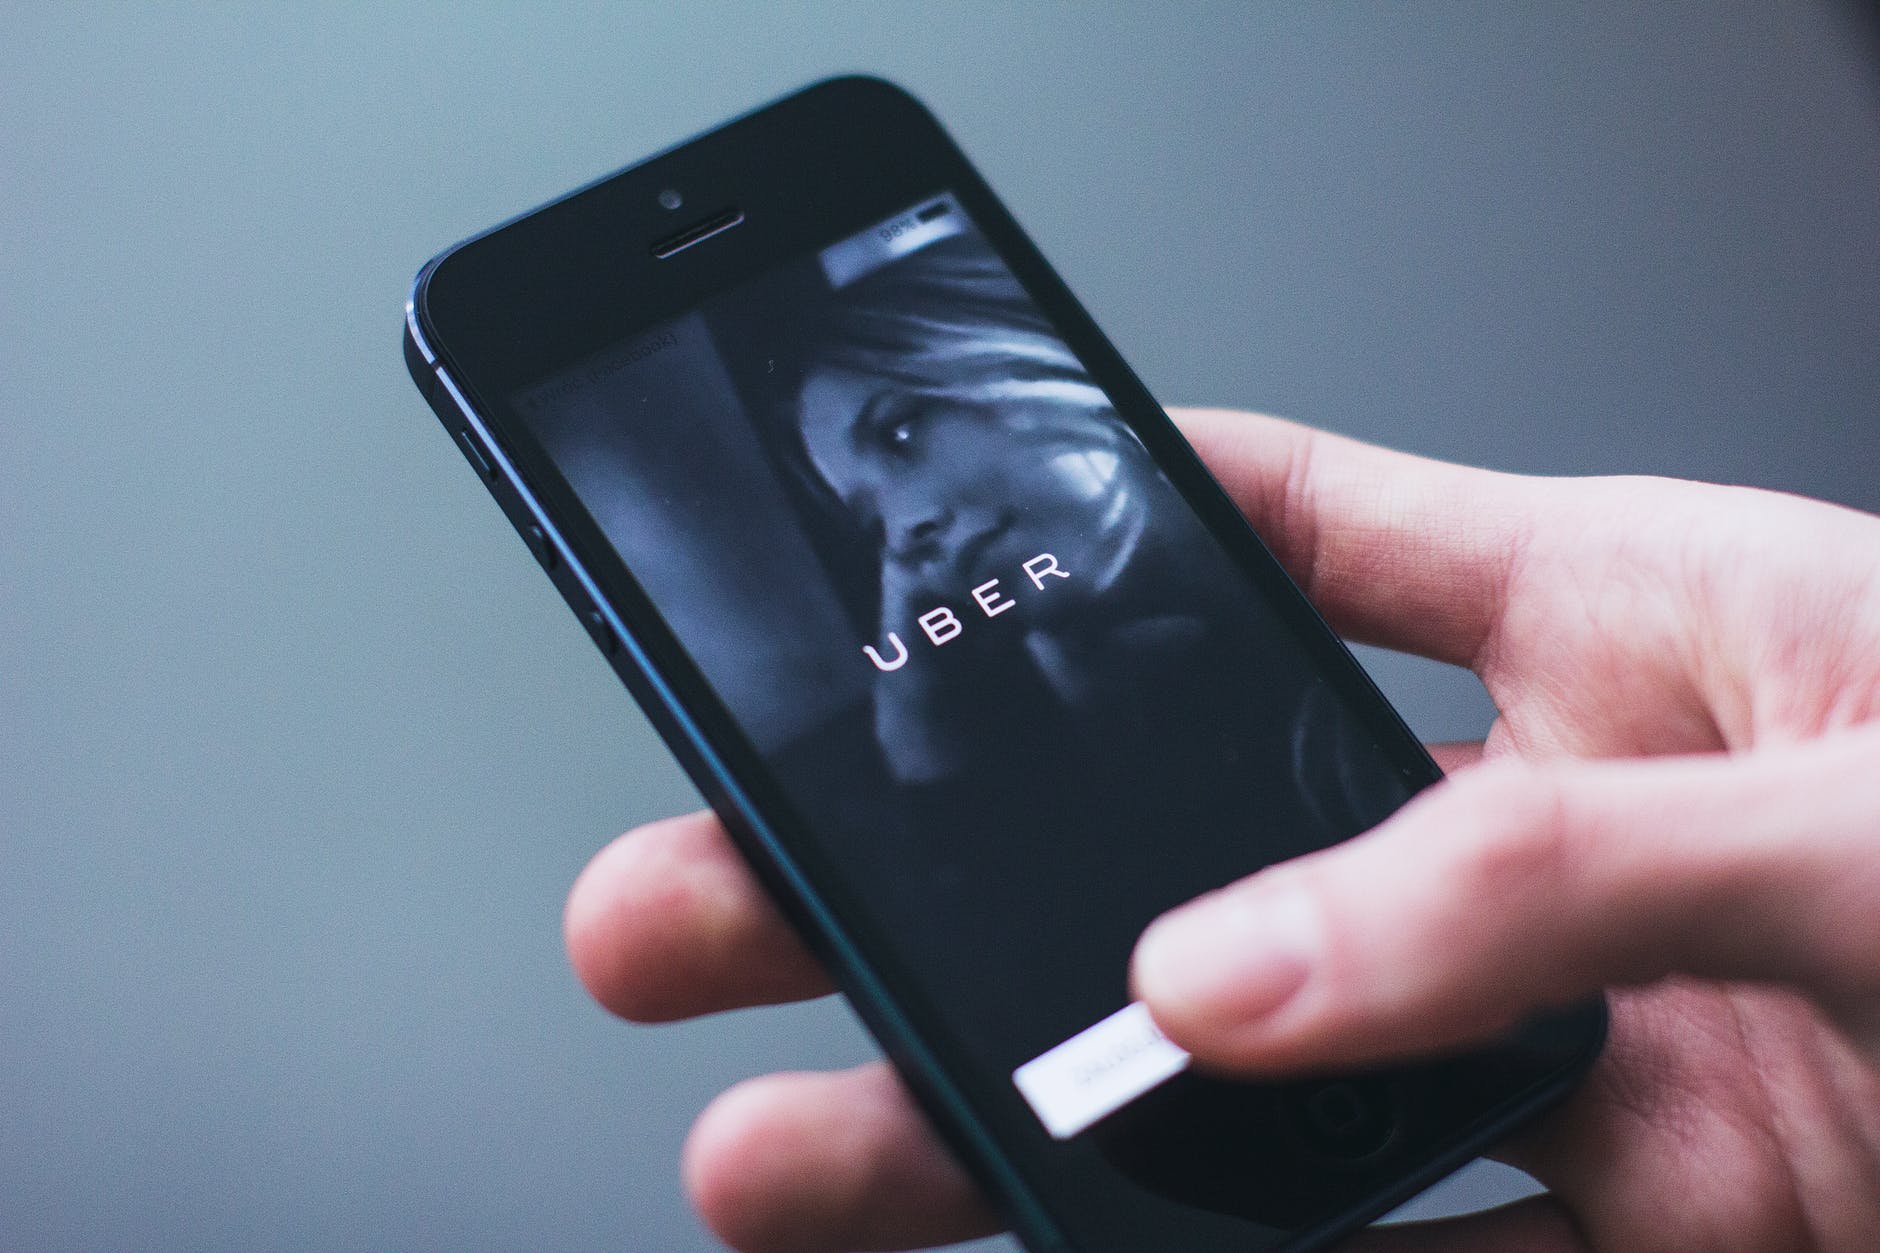 Uber Technologies Inc (NYSE:UBER) Reports Double Digit Revenue Growth Supported By Strong Mobility And Gross Bookings